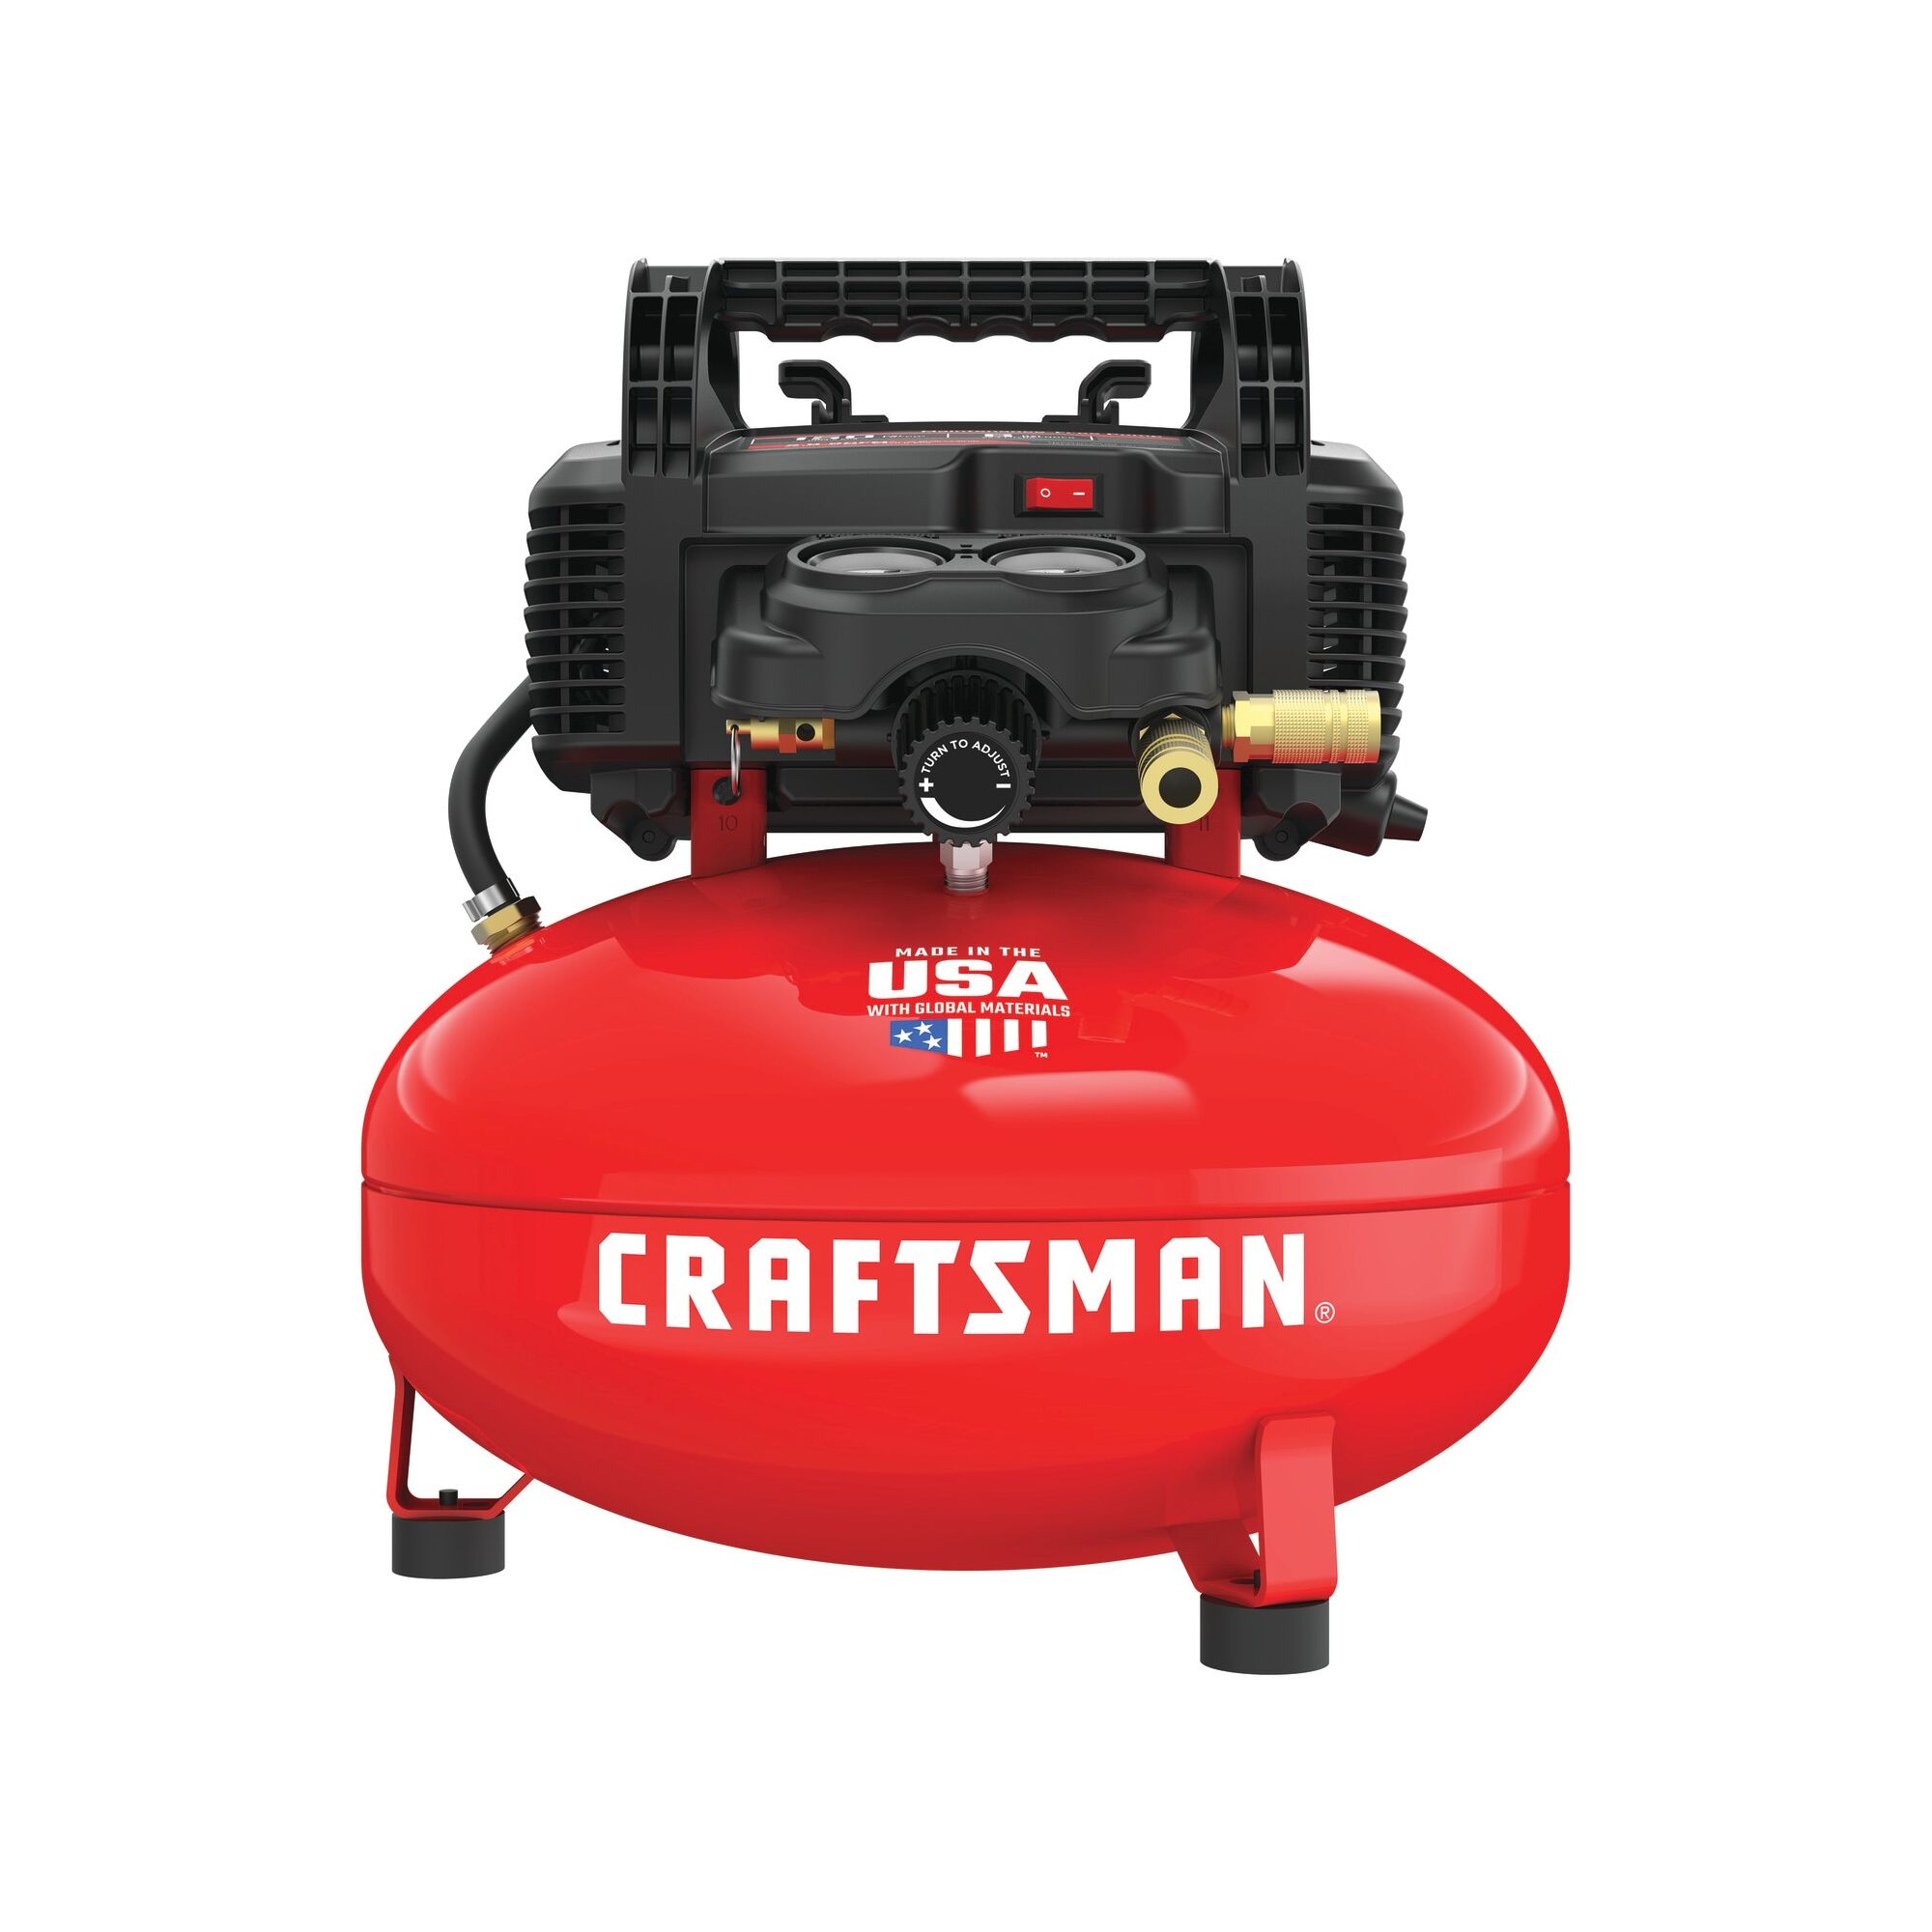 View of CRAFTSMAN Air Tools & Compressors highlighting product features